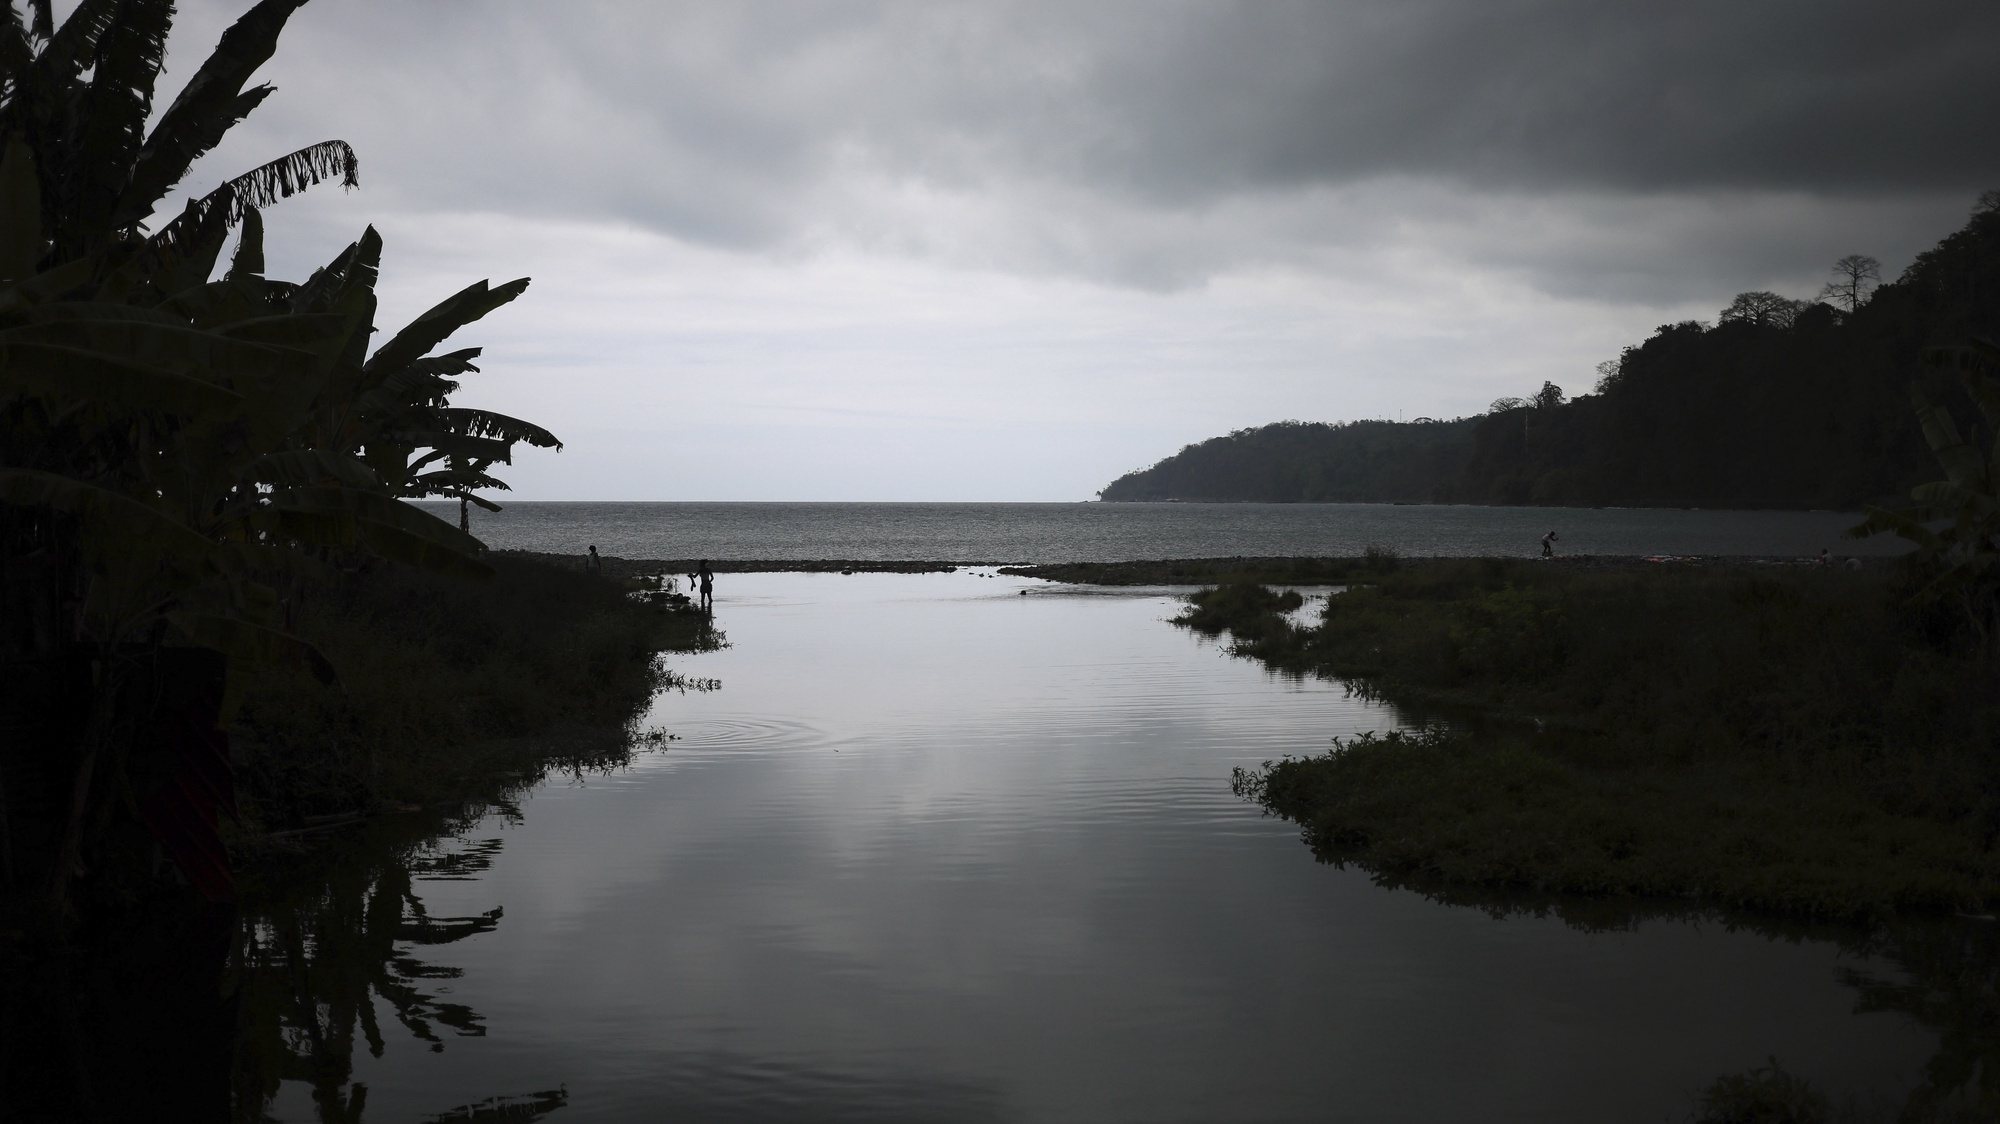 Santa Catarina, fishing village in the district of Lemba, Sao Tome and Principe, 22 Sptember 2022. Sao Tome and Principe goes to the polls for the legislative elections on the 25 September 2022. ESTELA SILVA/LUSA